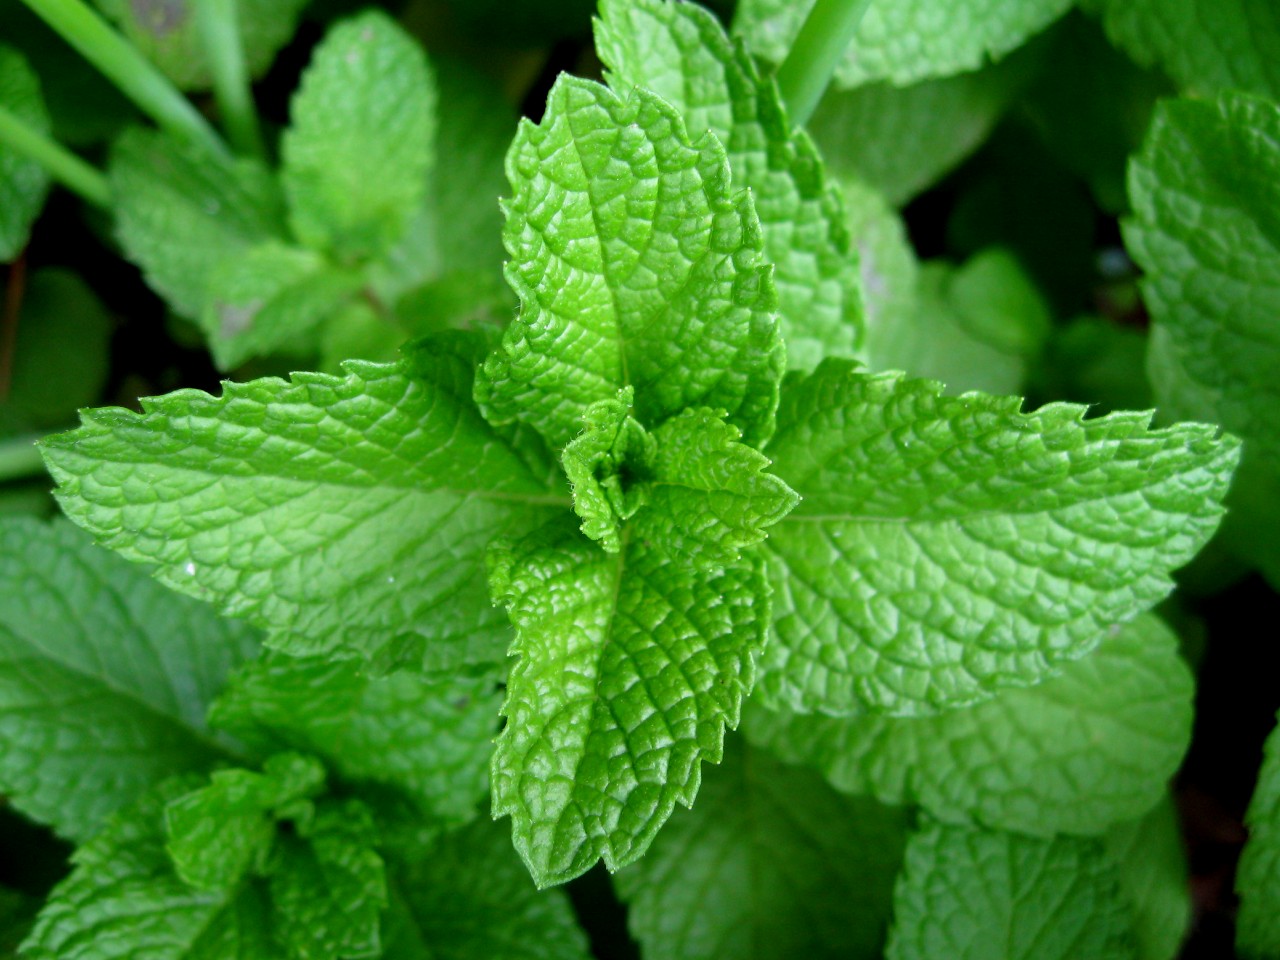 mint leaves for oily, acne-prone skin